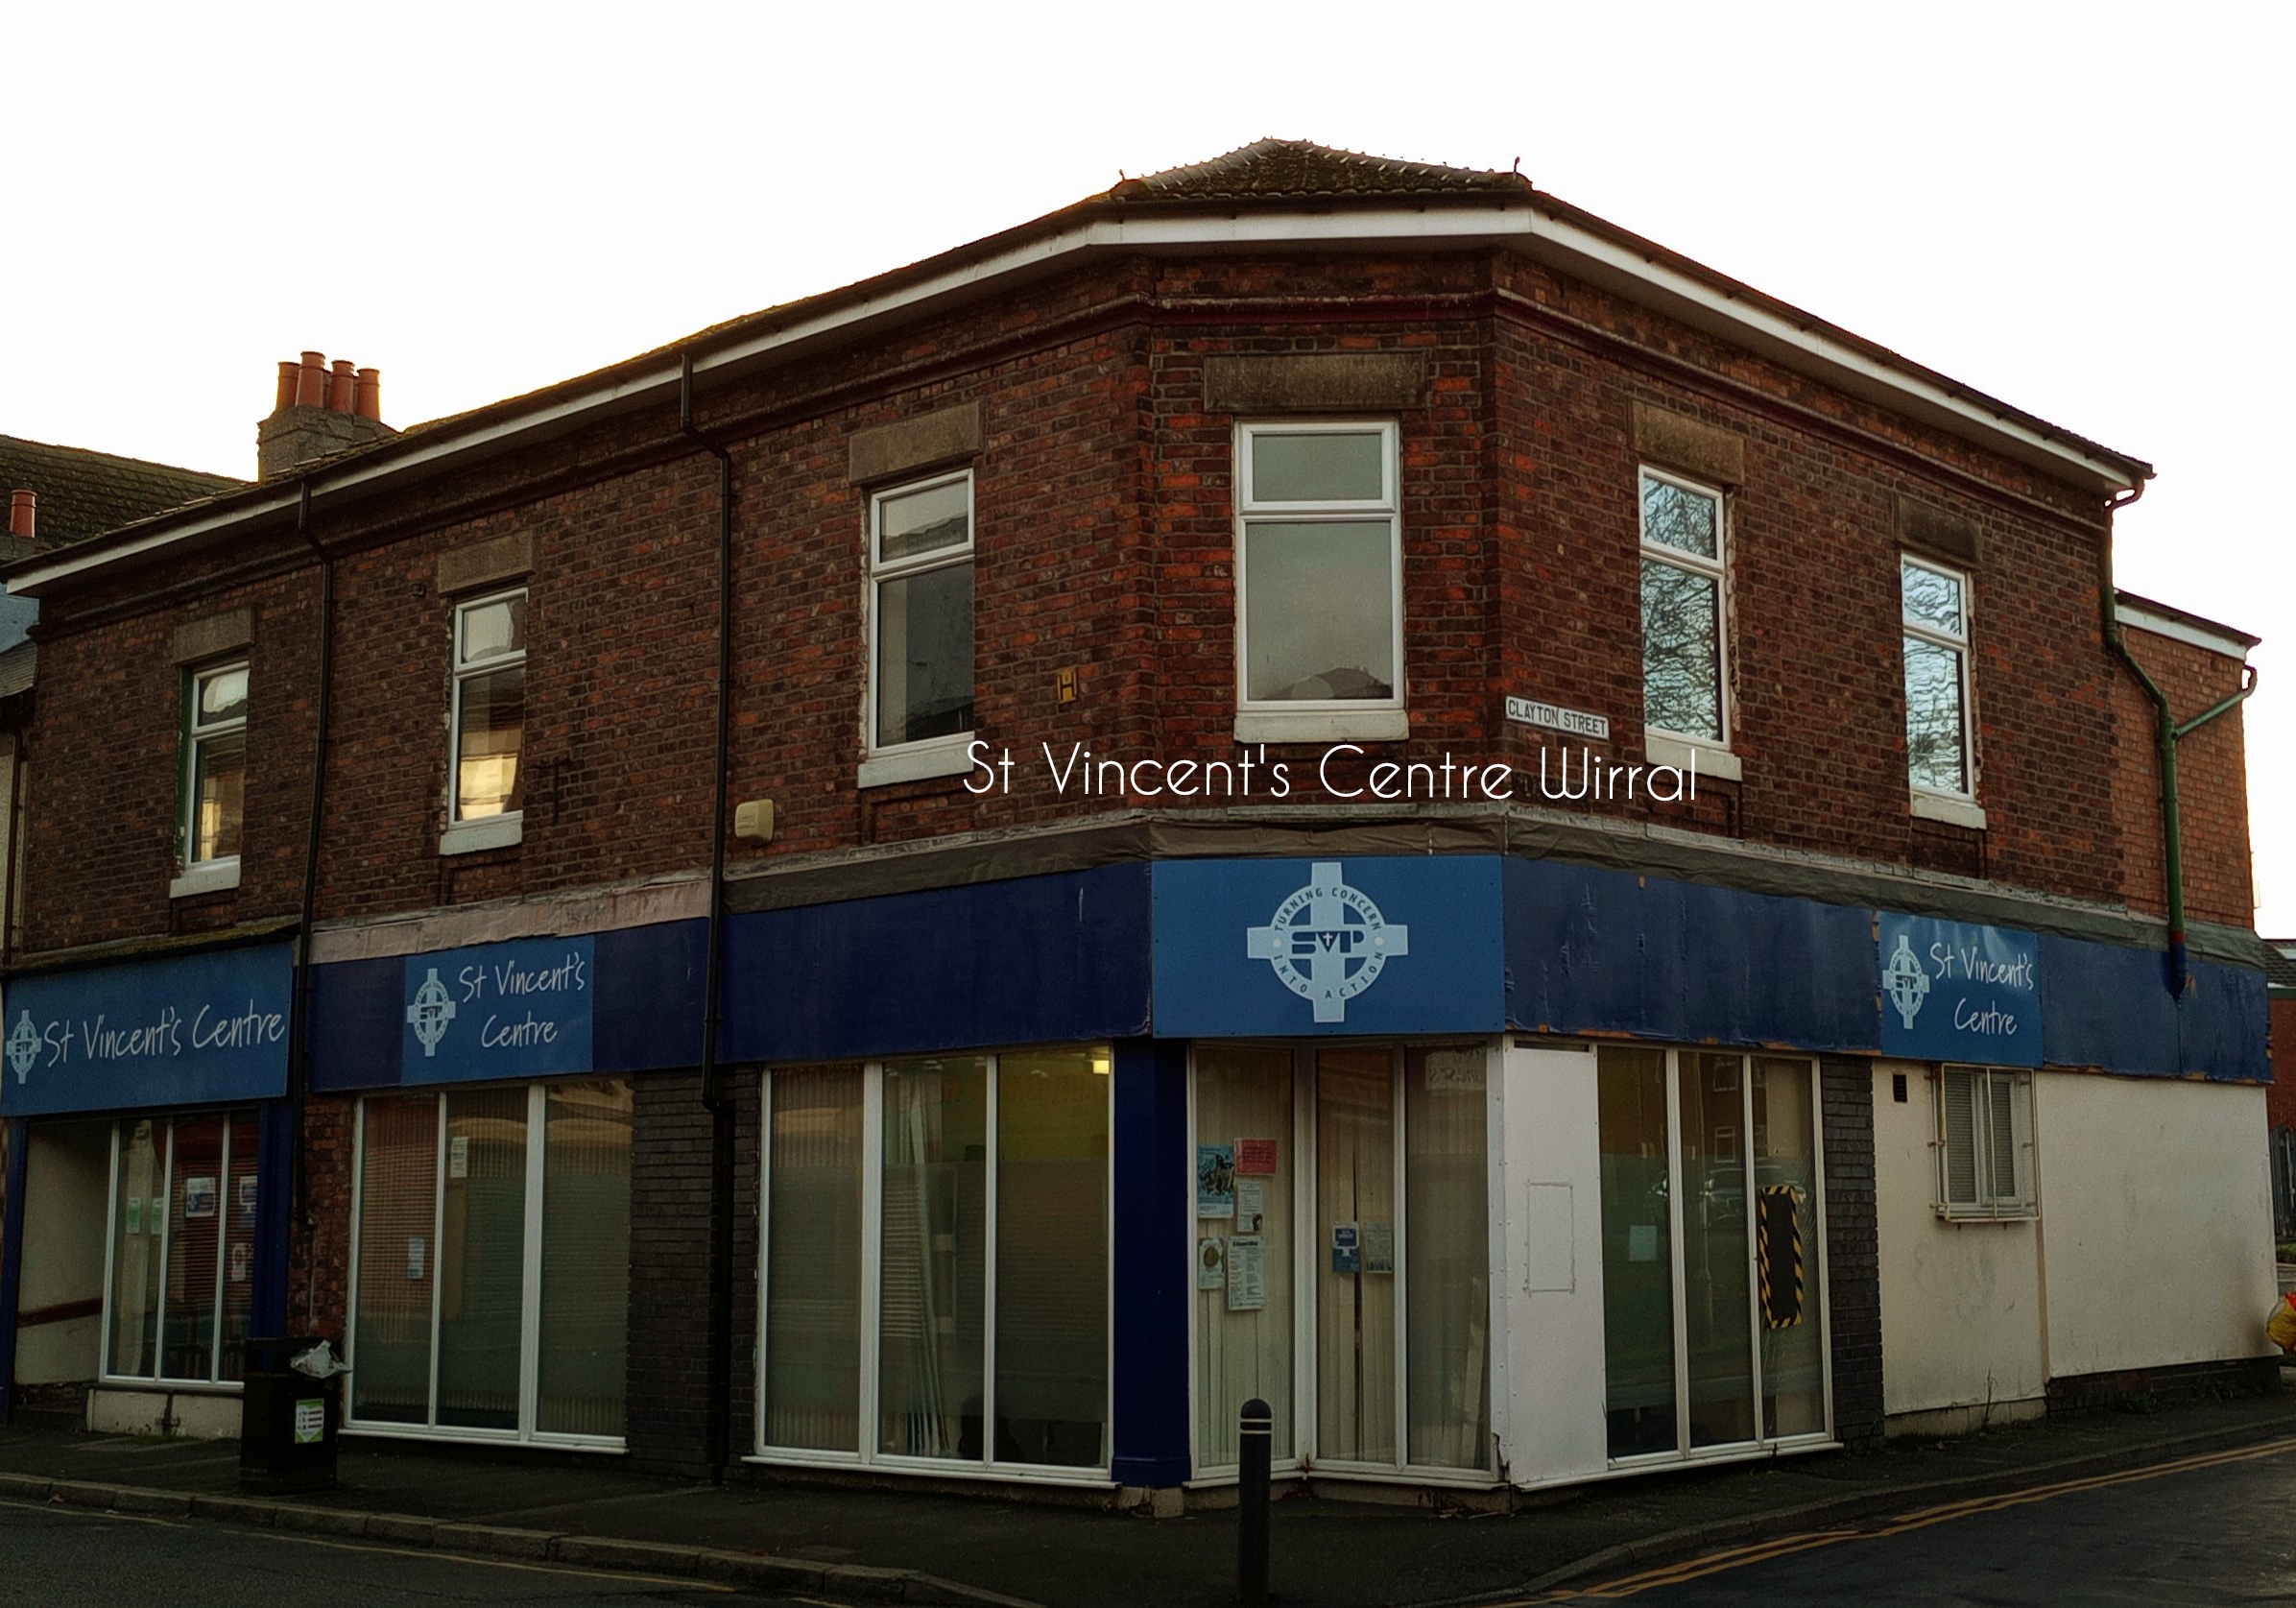 Picture of the St Vincent's Centre Wirral building